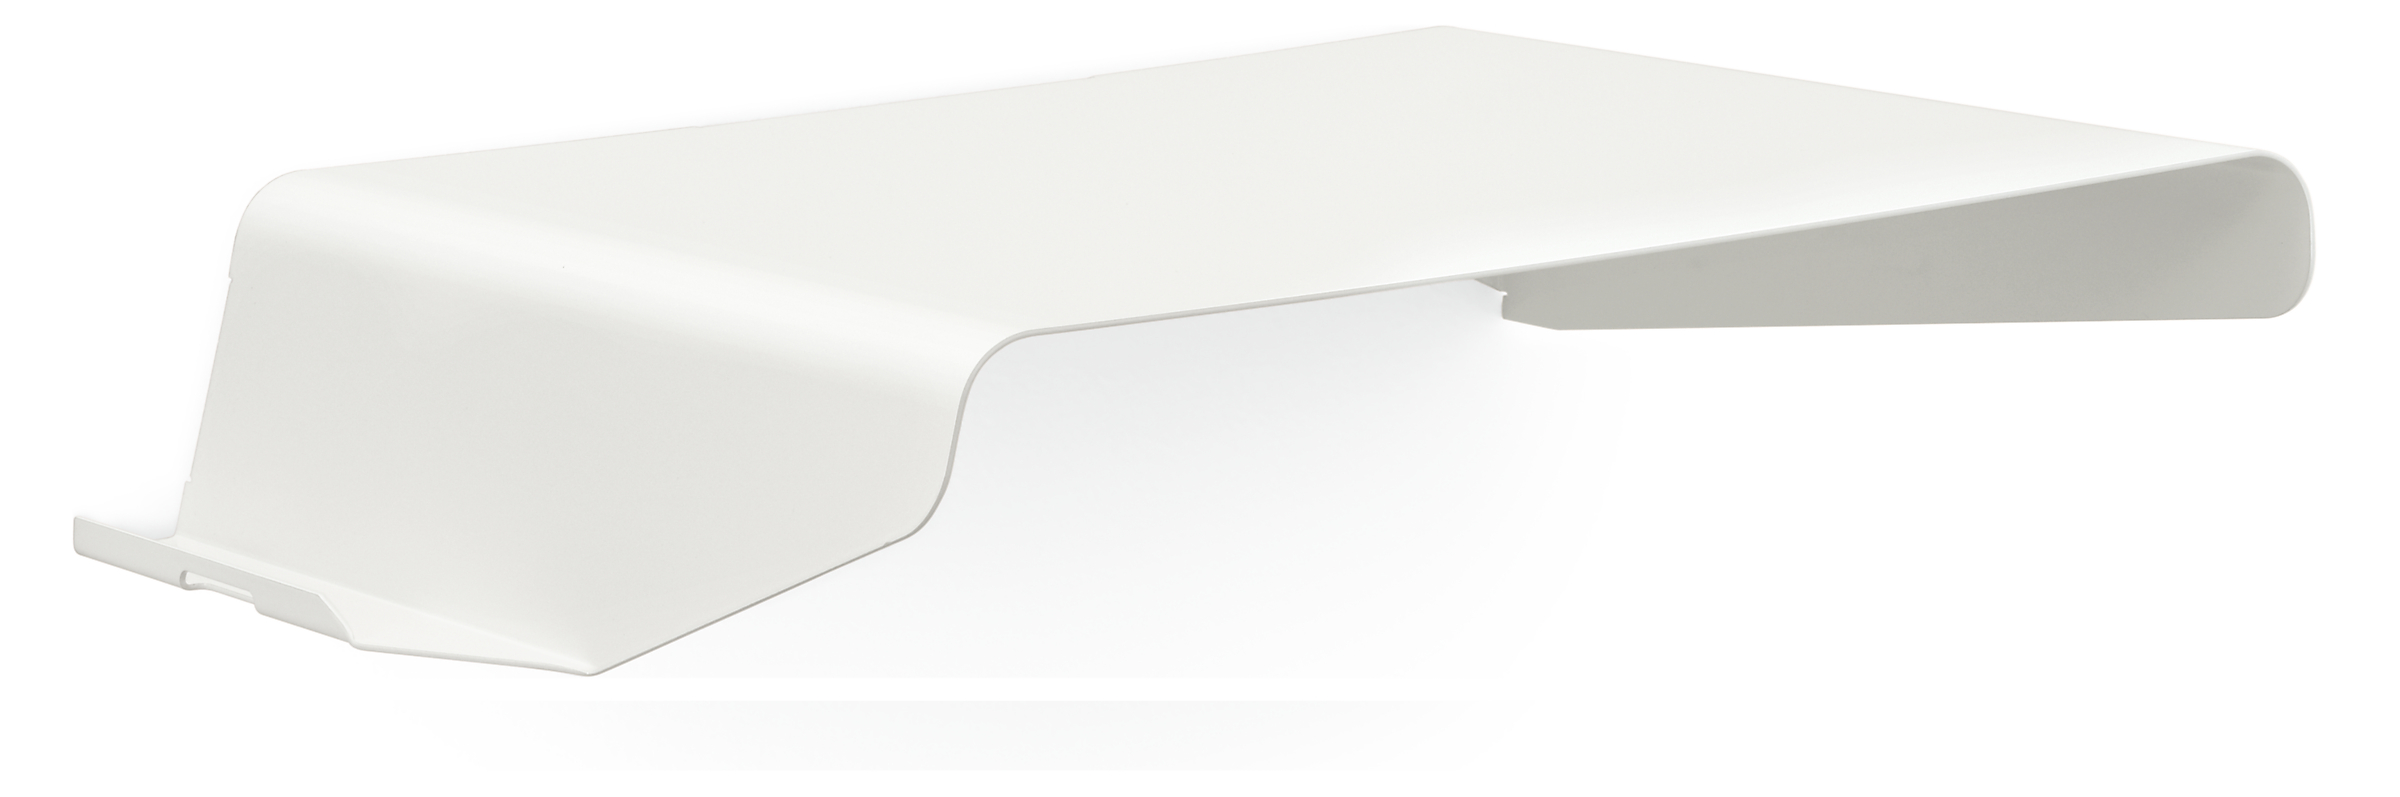 Cooper 18w 13d 3.5h Wall Shelf with Left-side Ledge in White